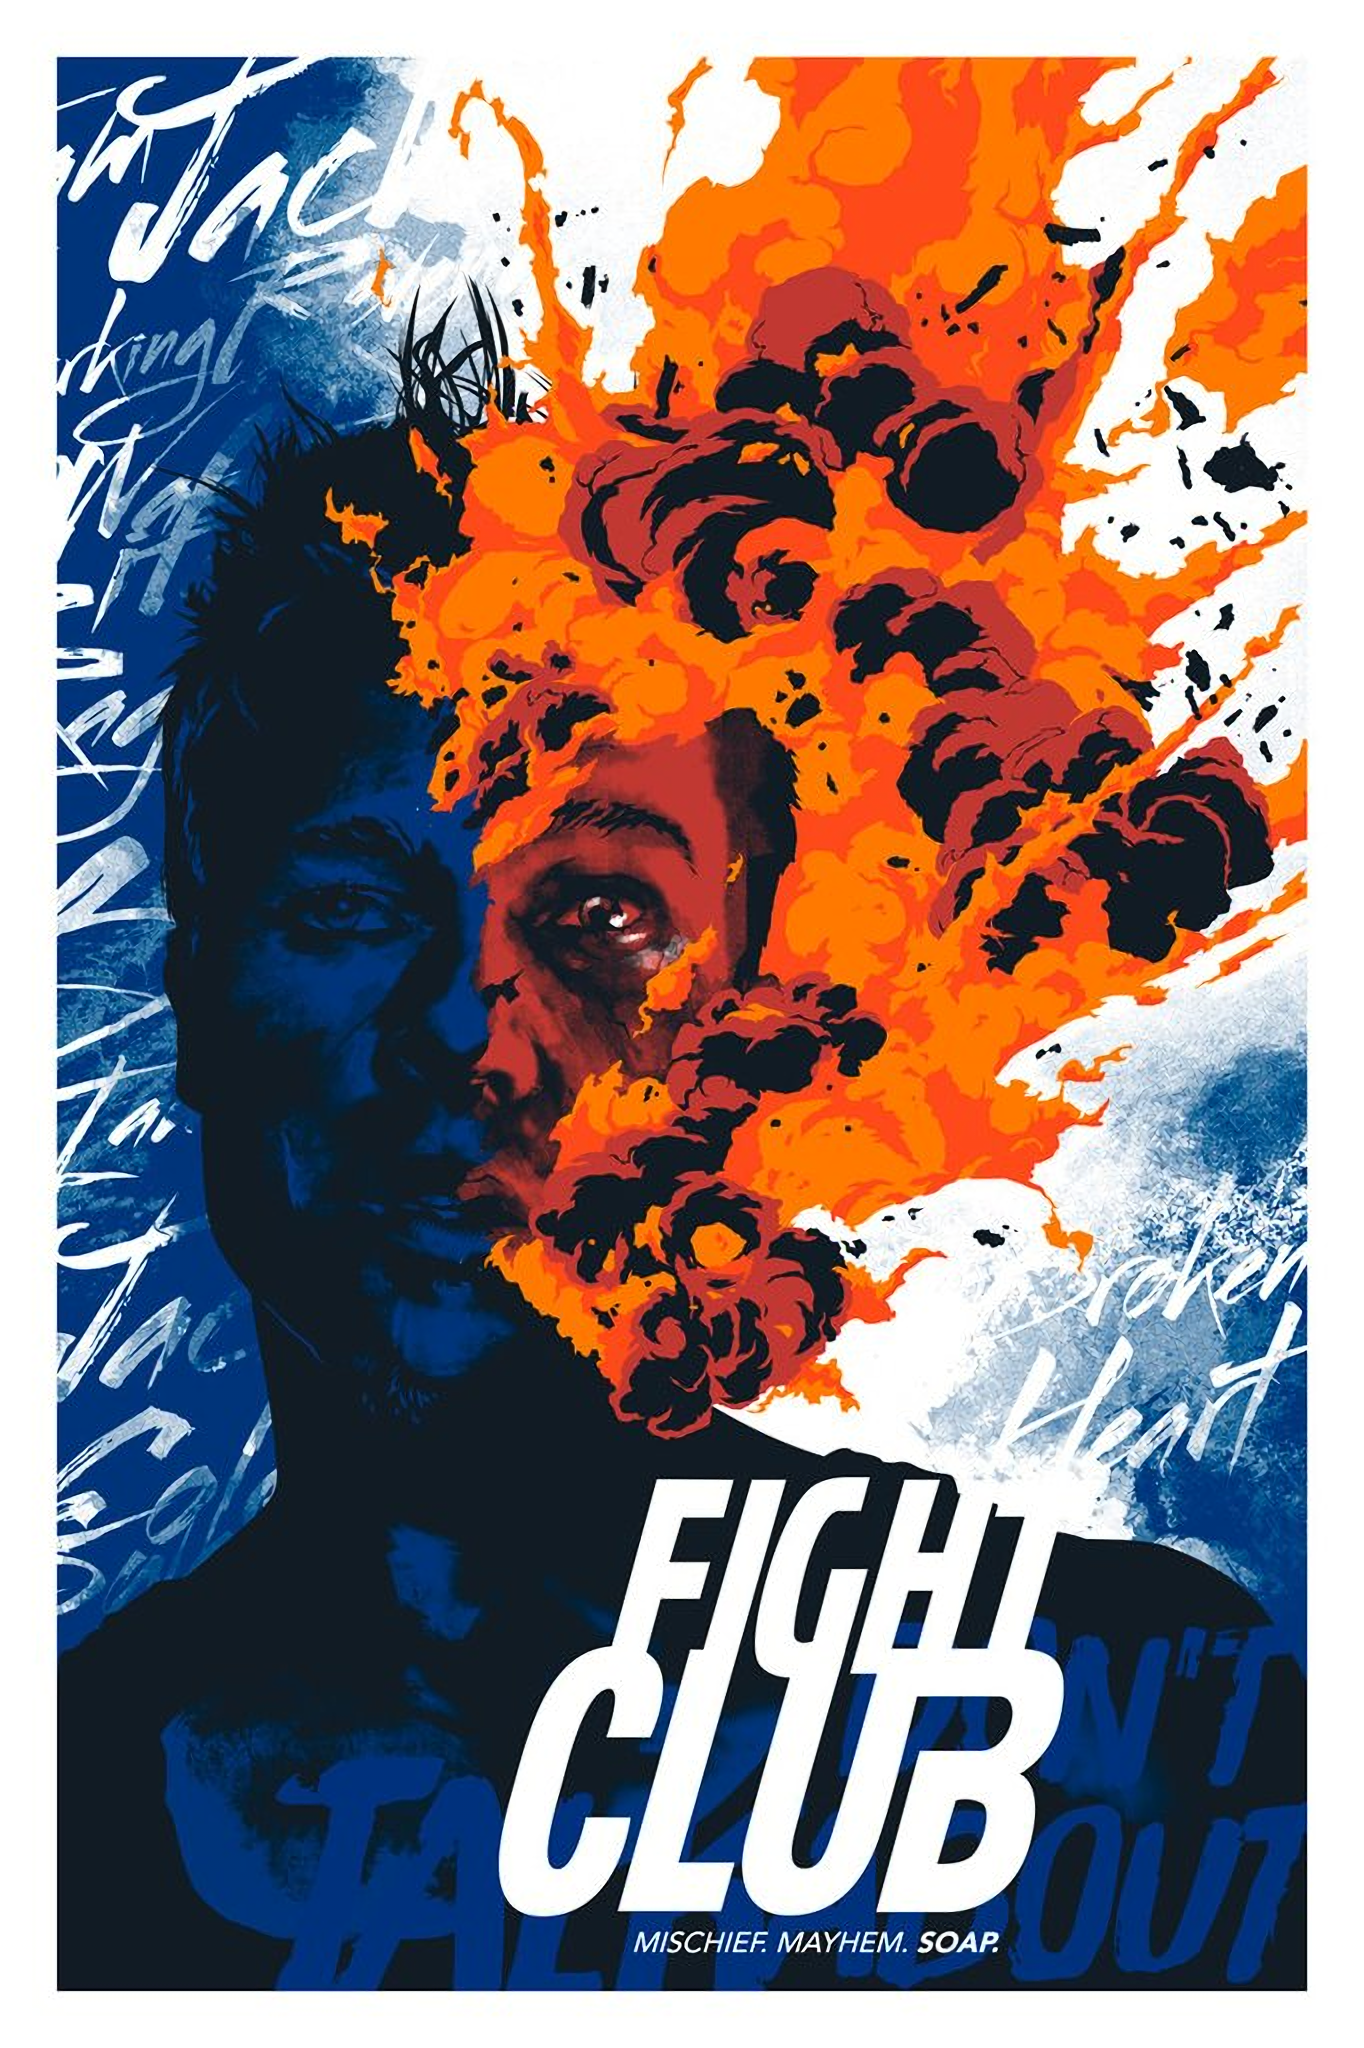 Fight Club (1999) HD Wallpaper From Gallsource.com. Movie poster art, Fight club poster, Fight club